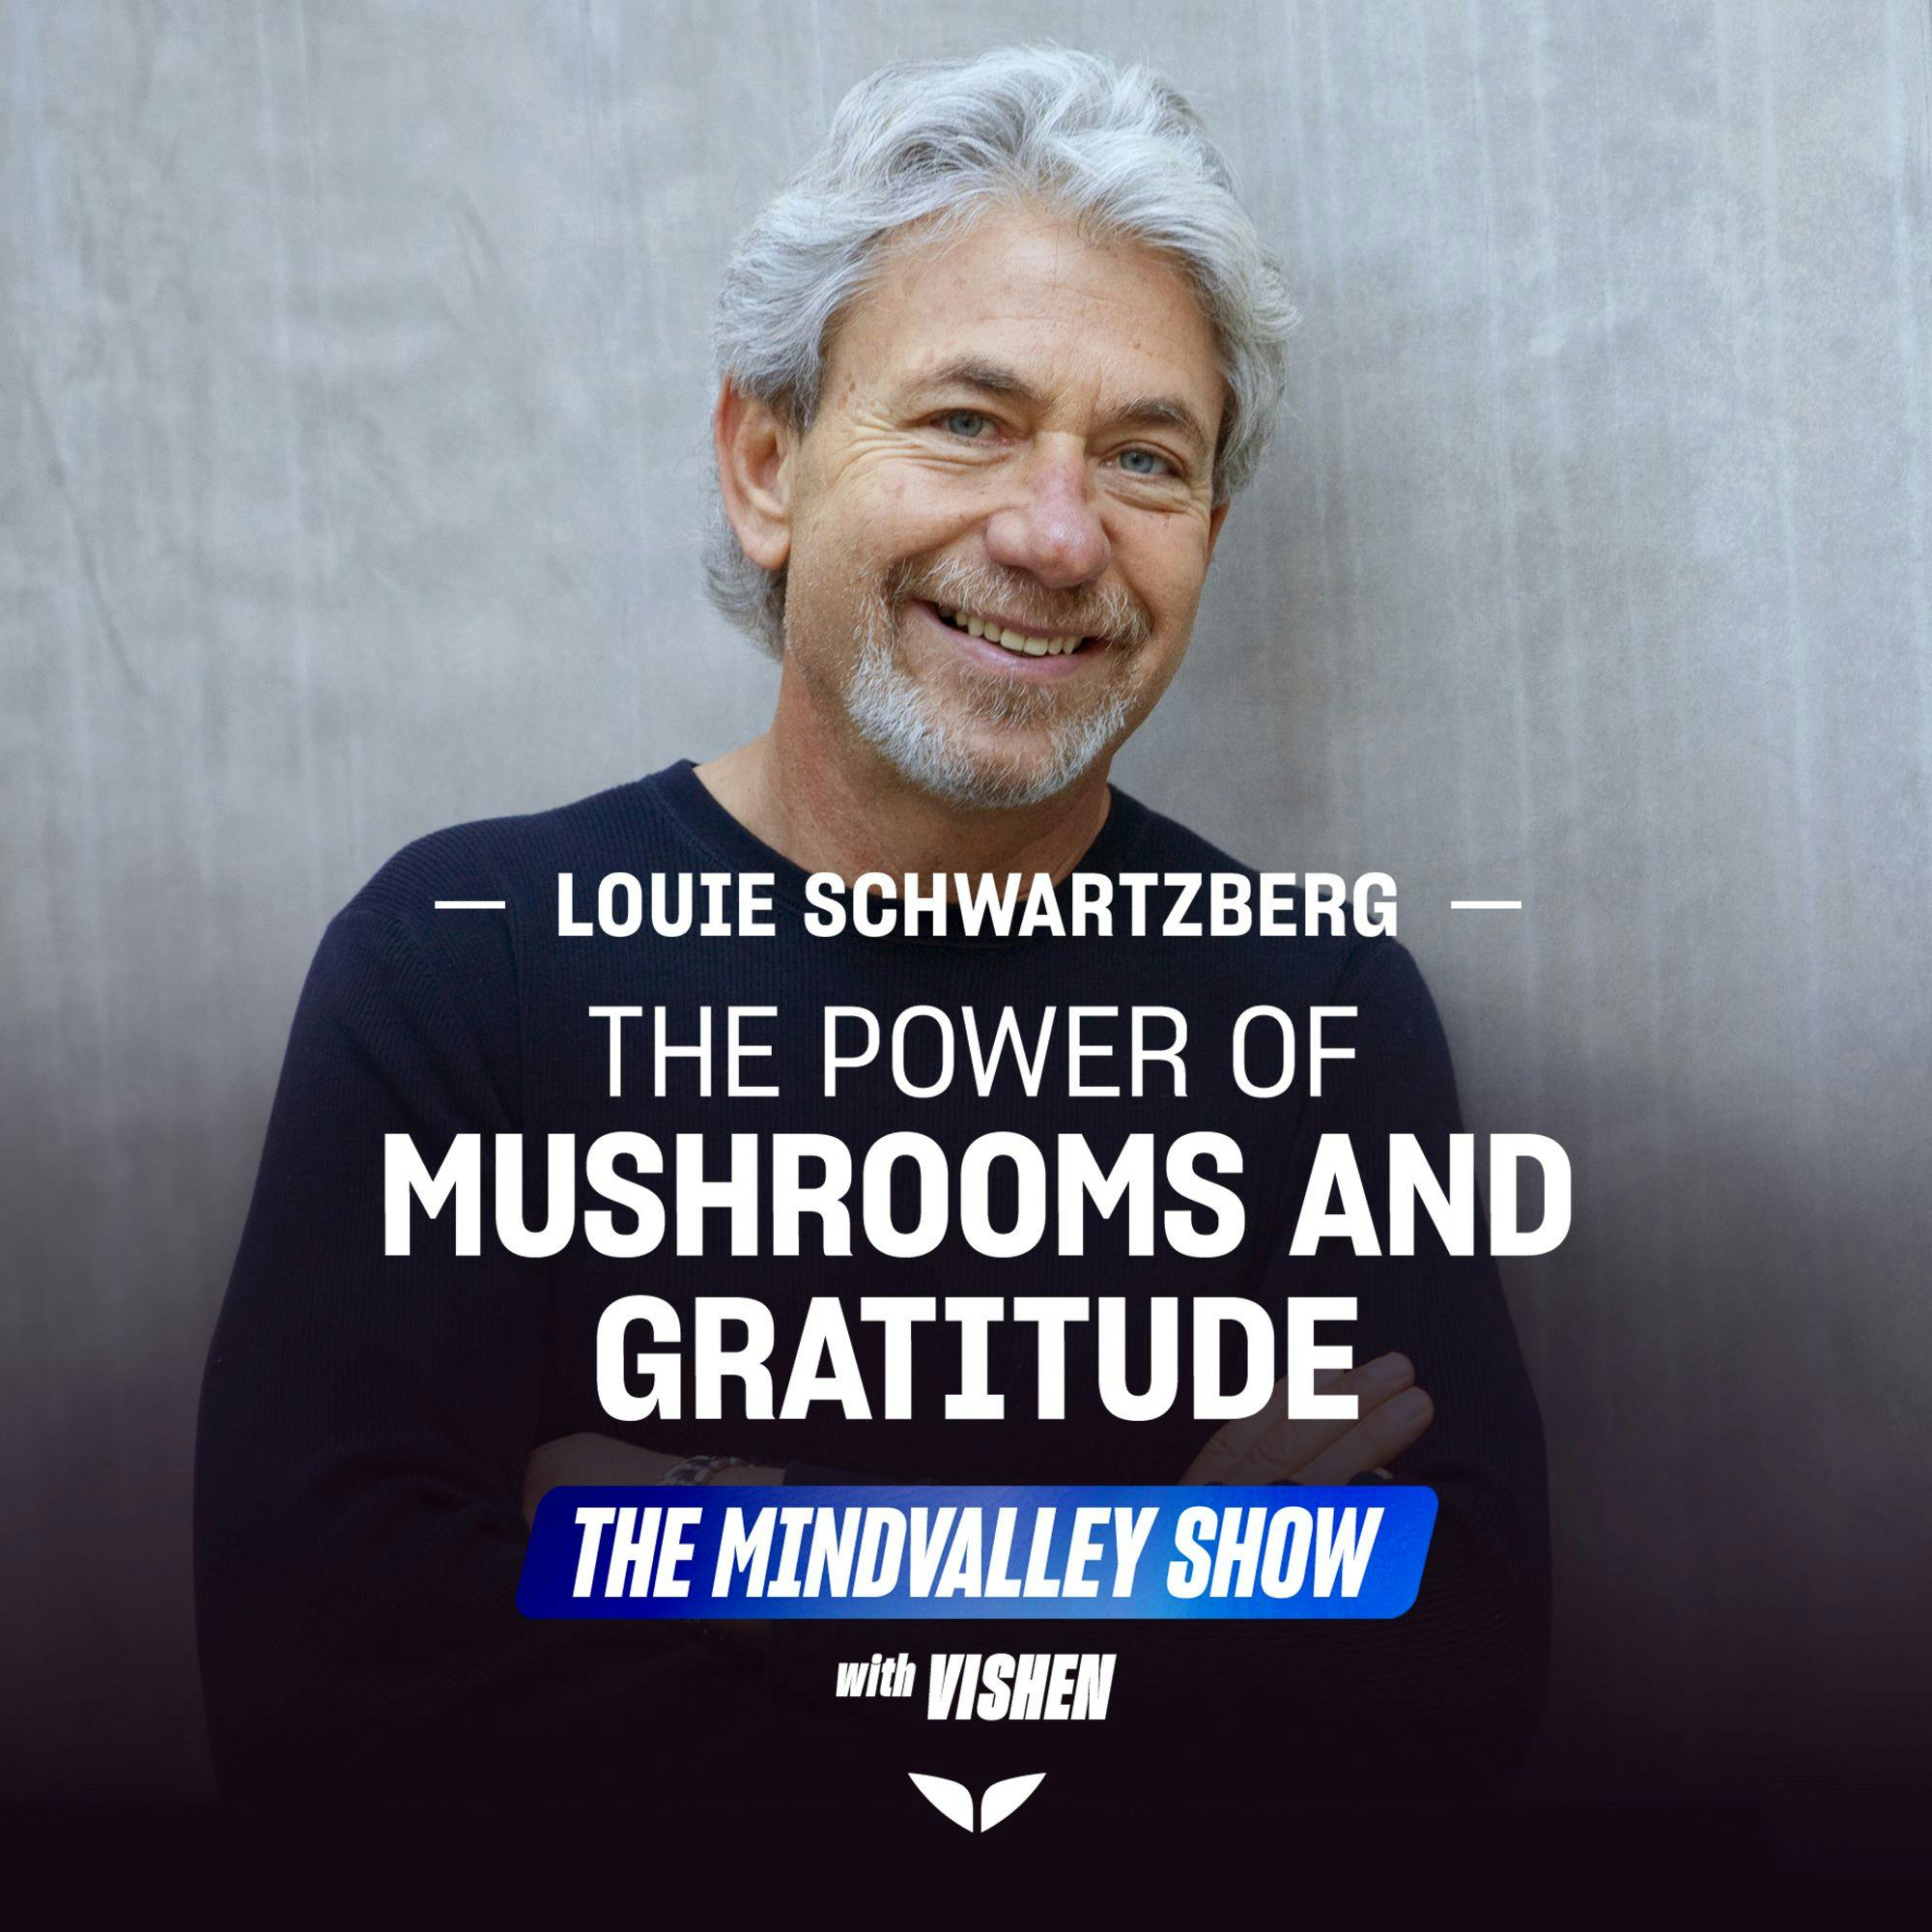 The Power of Mushrooms and Gratitude with Fantastic Fungi’s Louie Schwartzberg